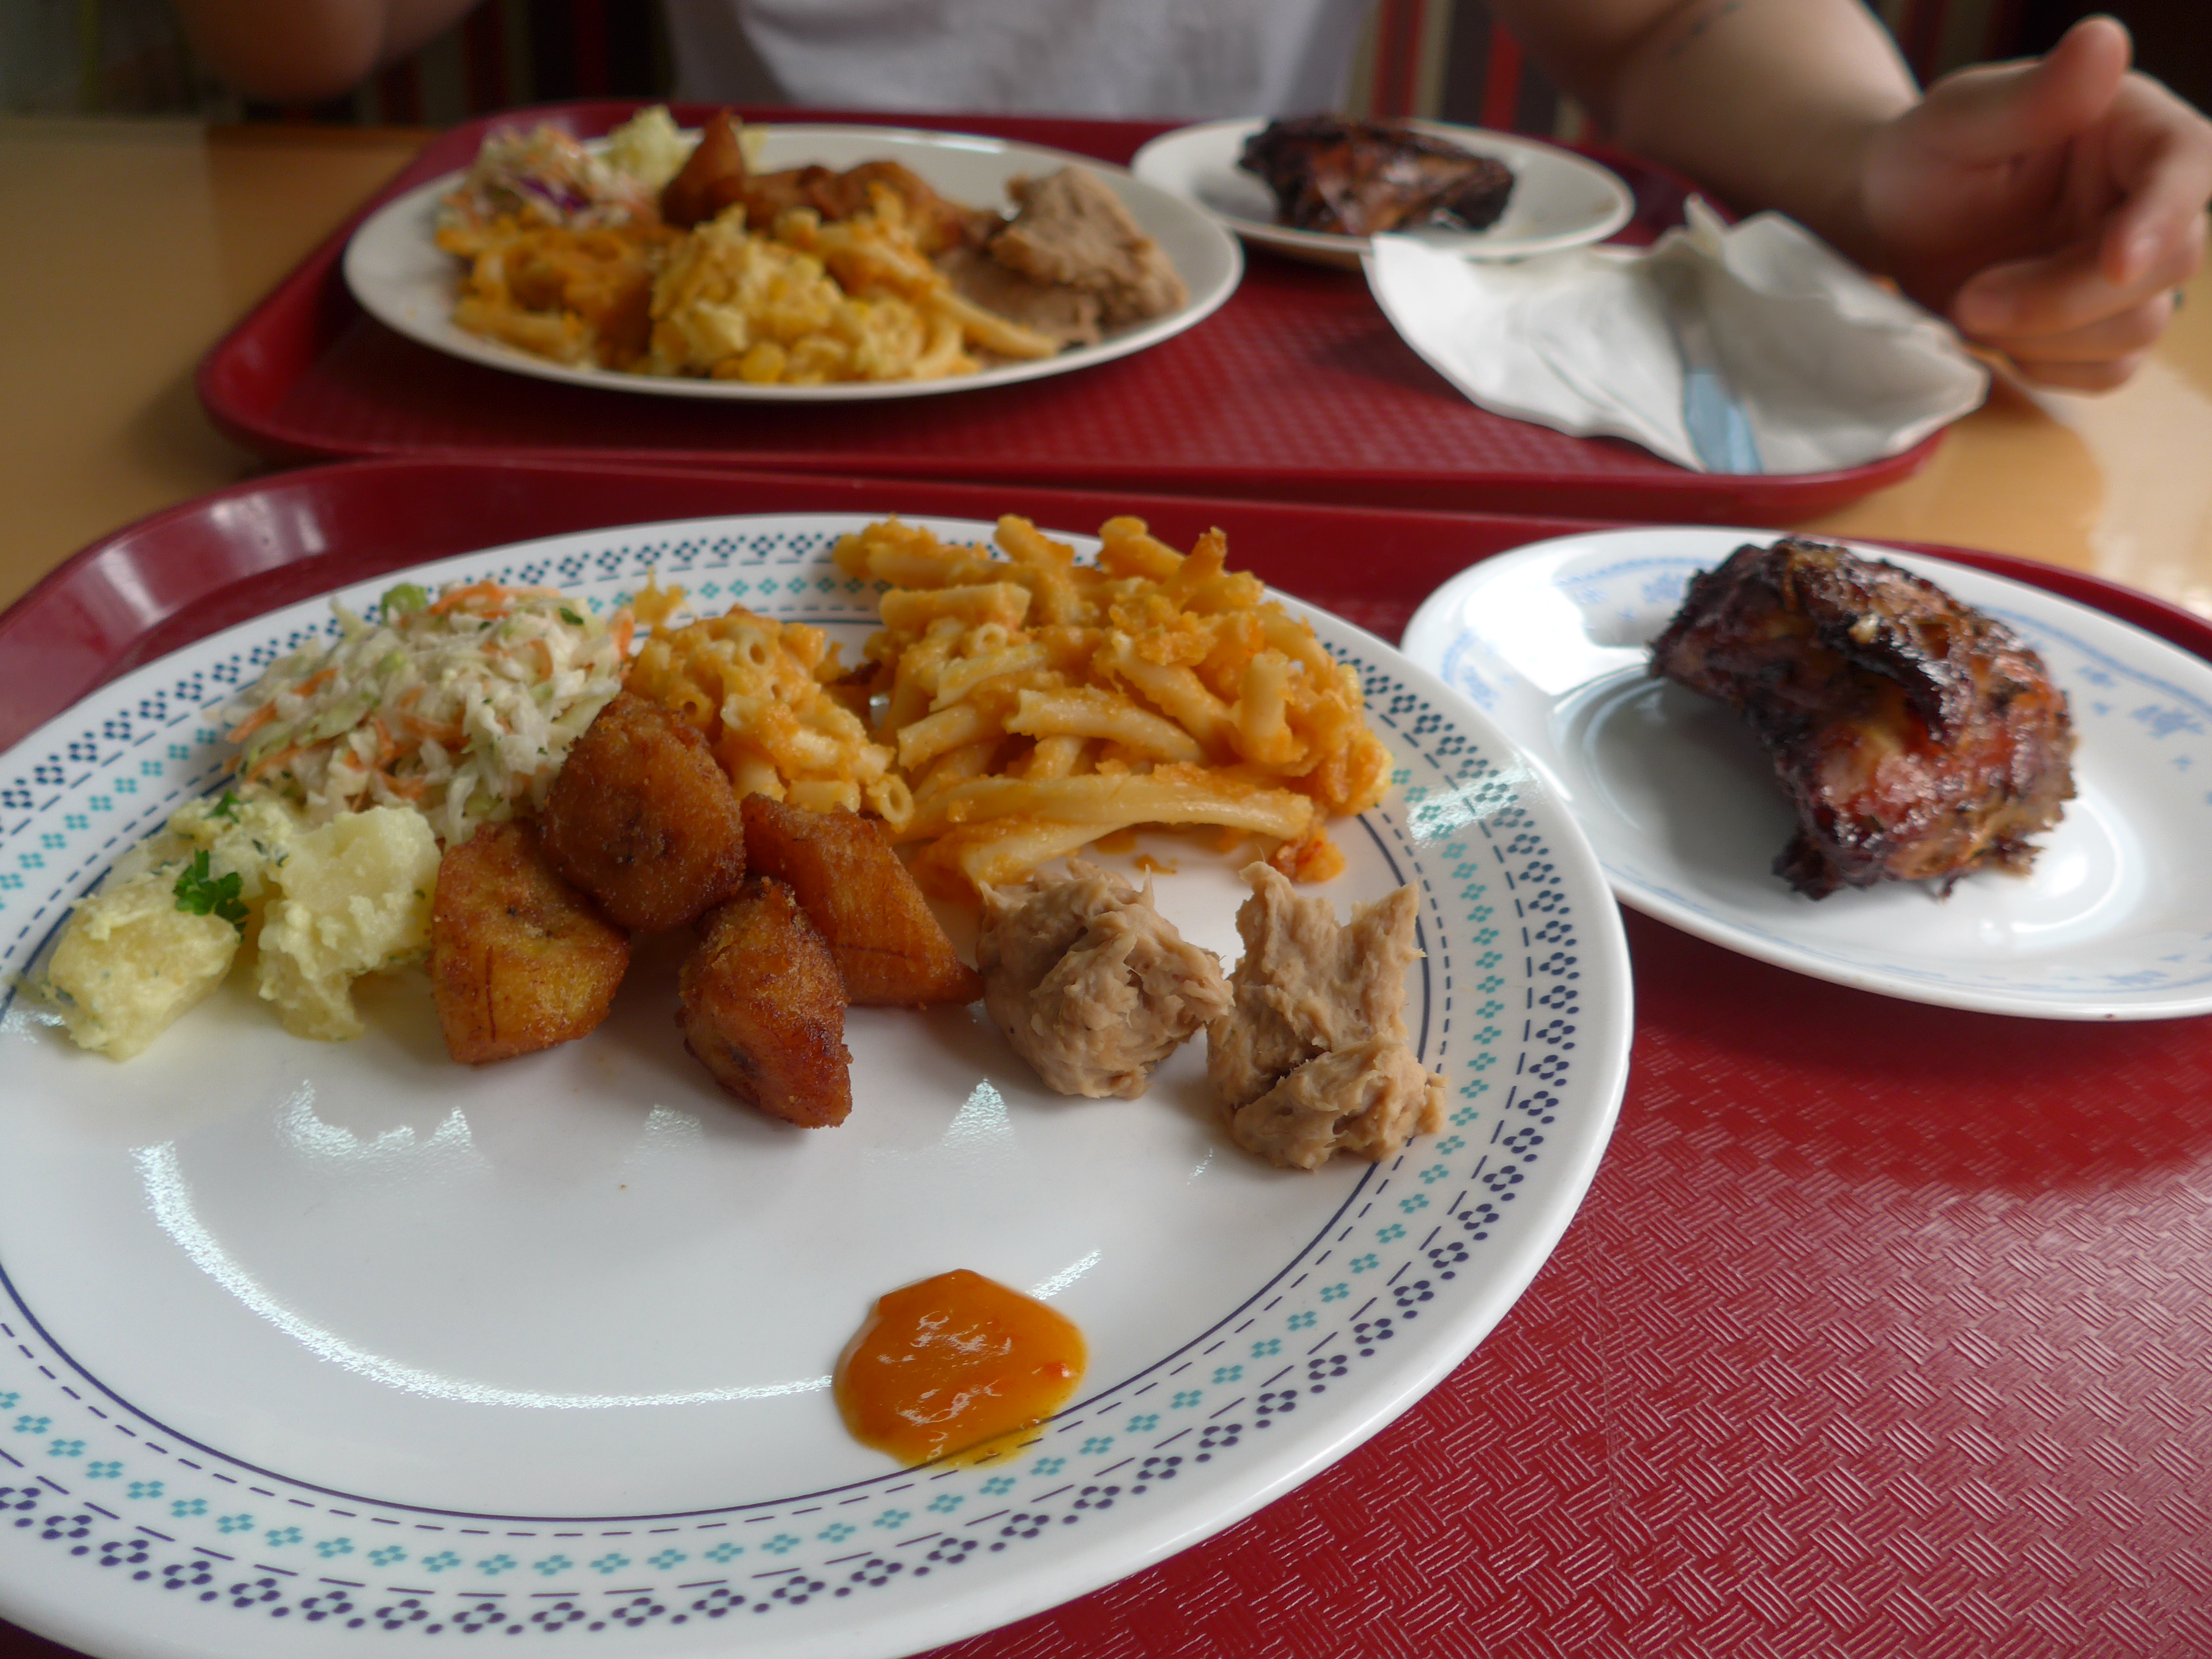 Lunch at The Balcony Restaurant in Bridgetown, Barbados